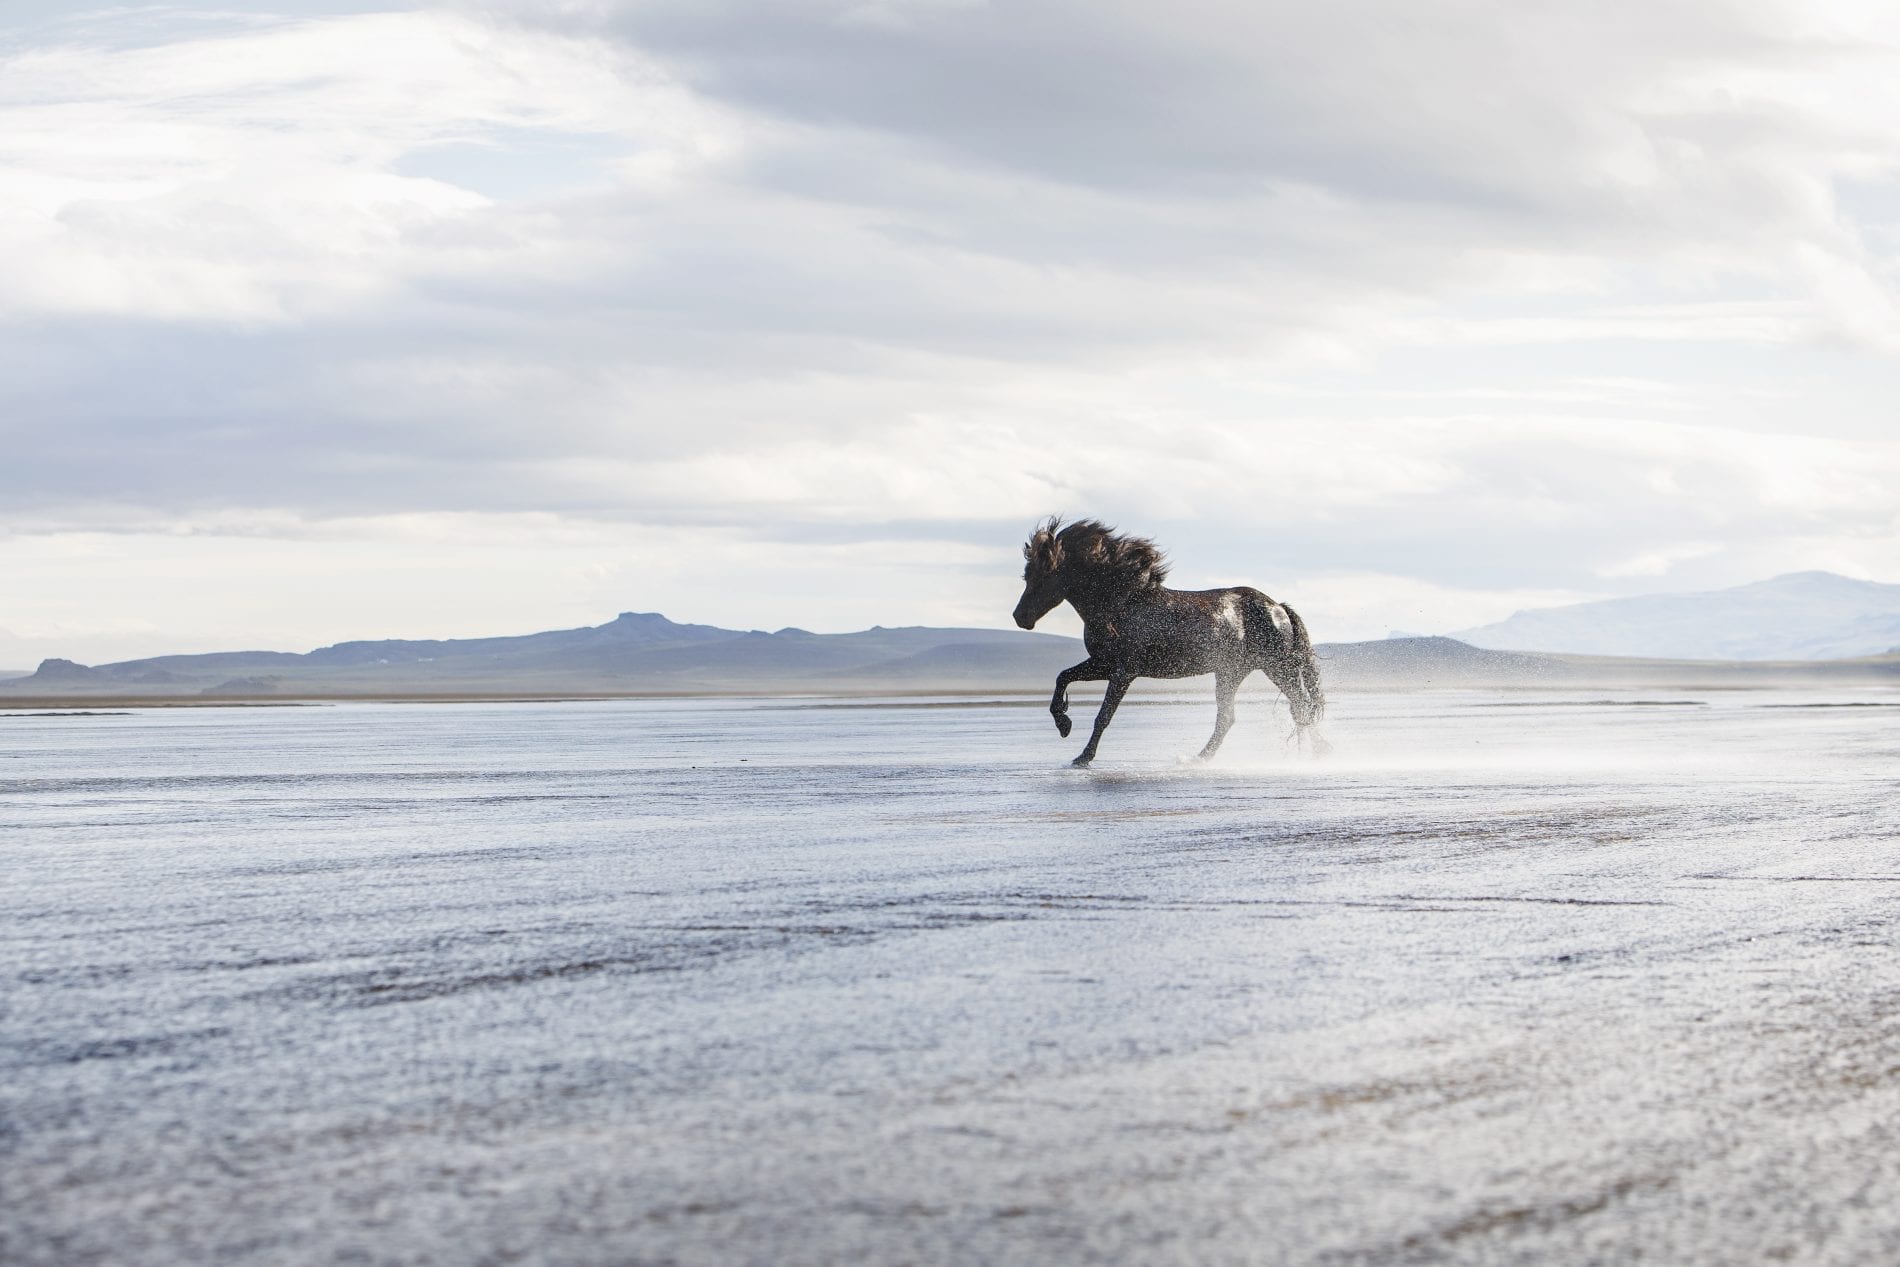 In the expanse of nature, a horse walks in shallow water